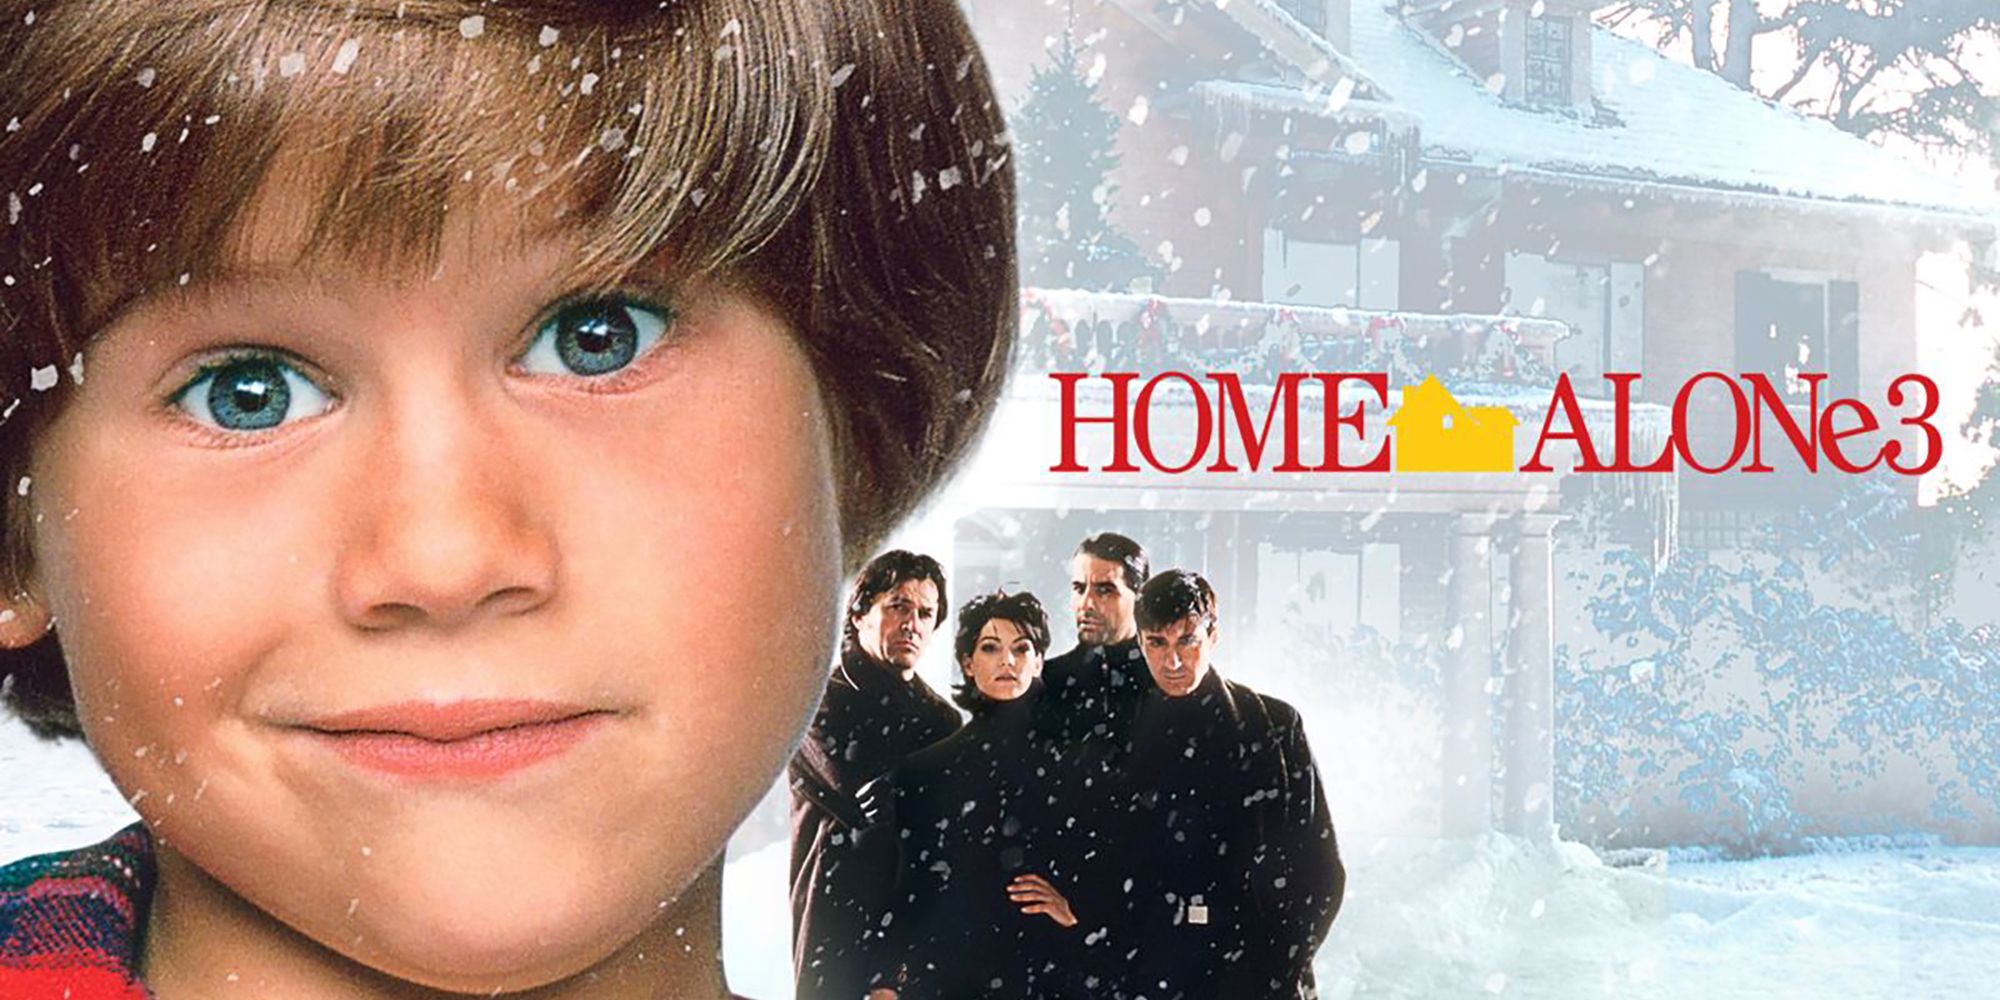 A Poster For Home Alone 3